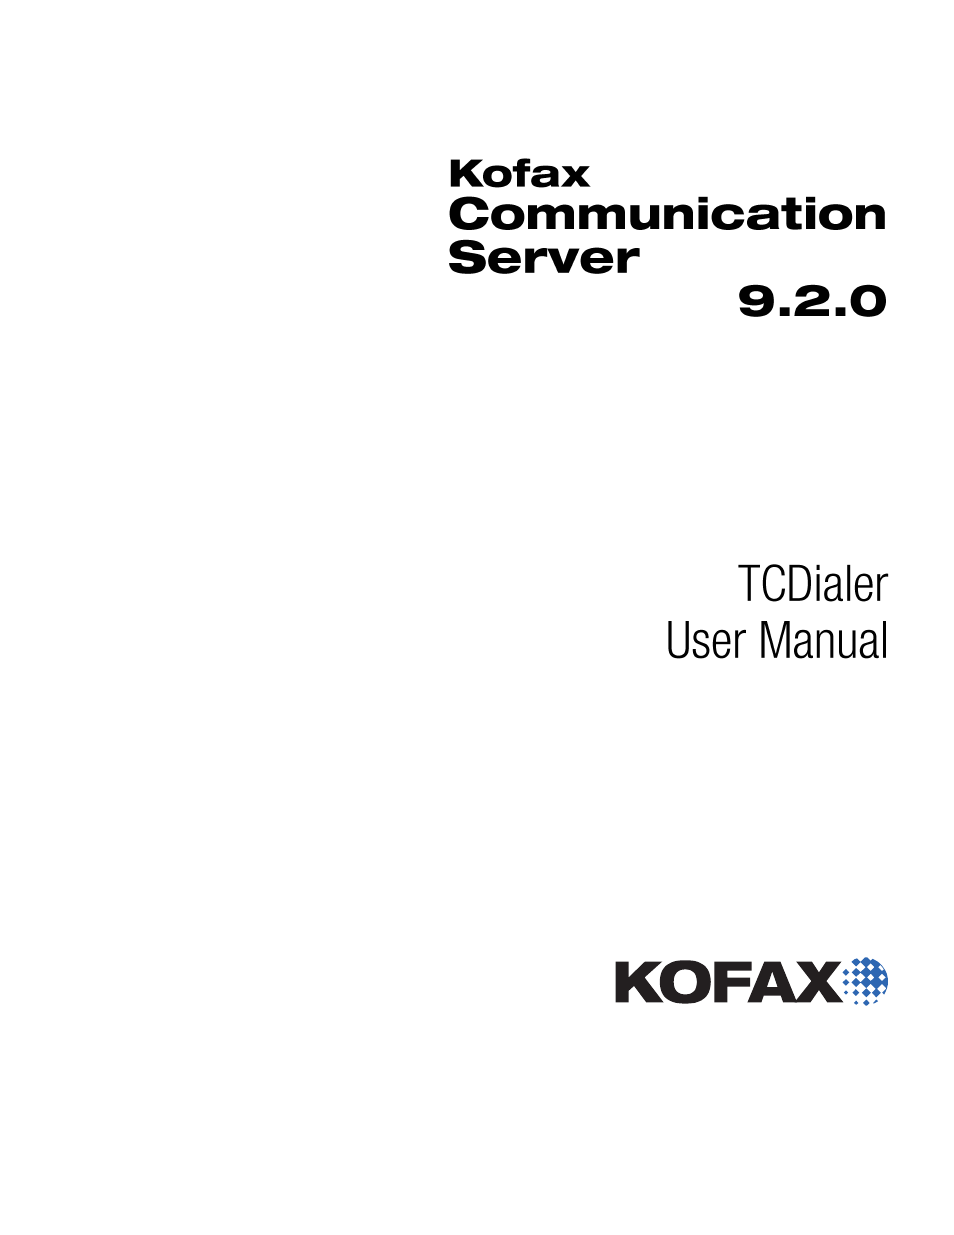 Kofax Communication Server 9.2.0 User Manual | 14 pages